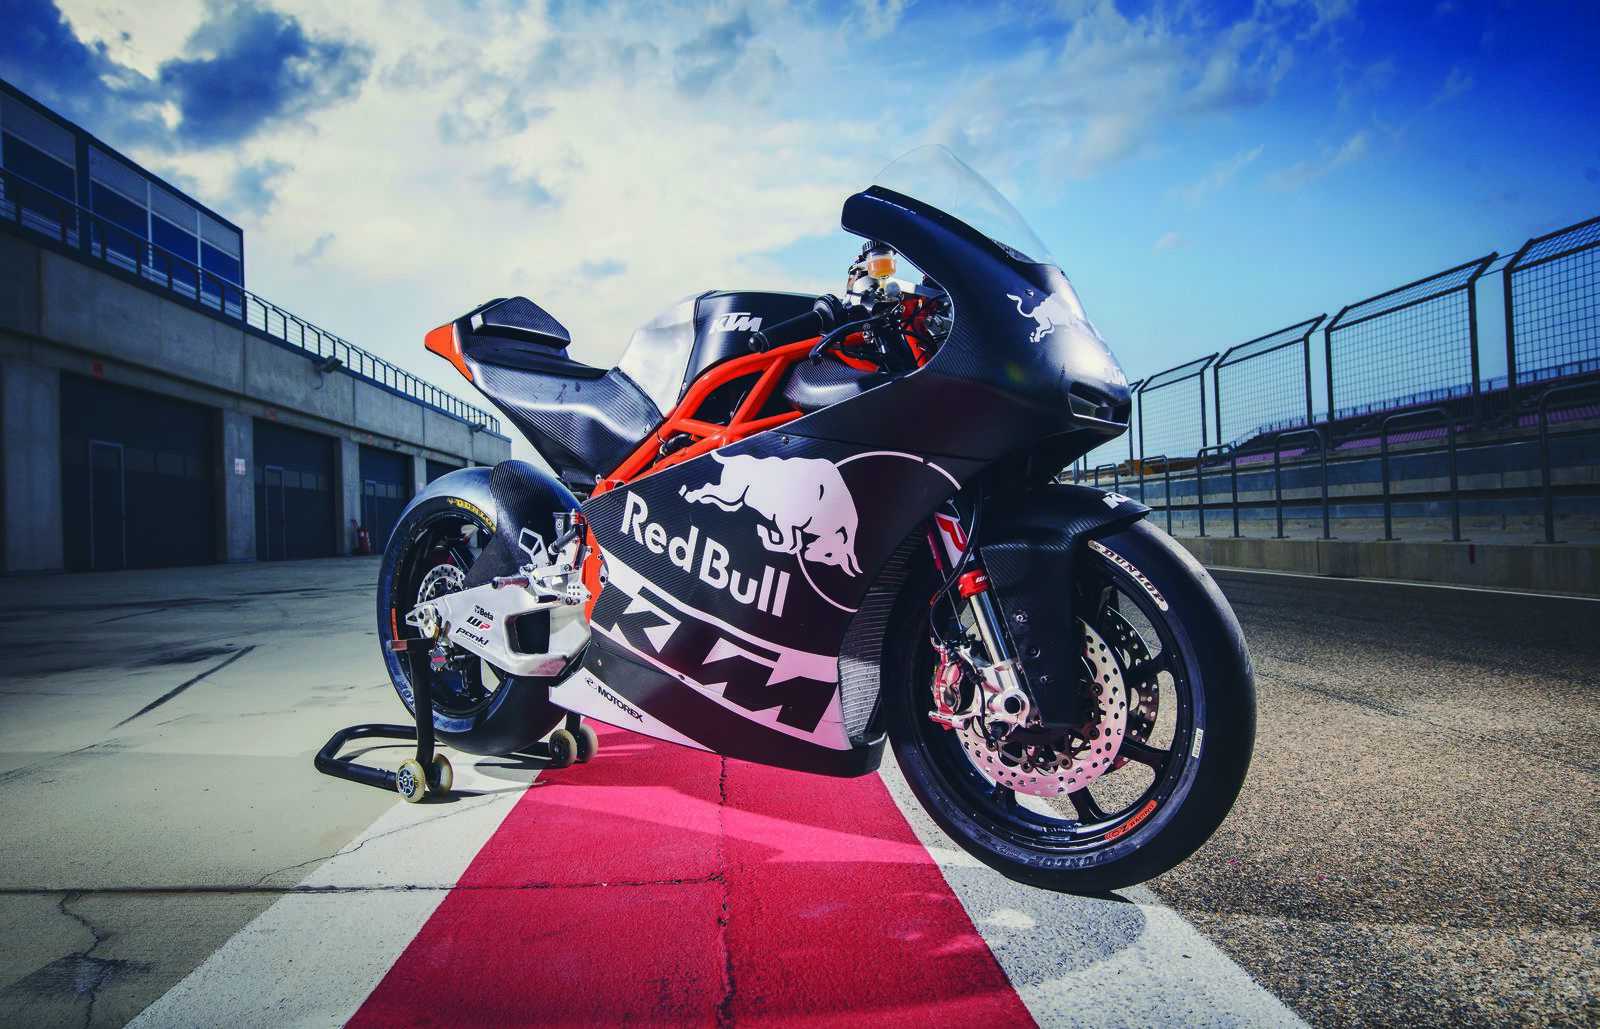 Bull KTM Ajo To Participate In 2017 Moto2 World Championship With Binder, Oliveira - Roadracing World Magazine Motorcycle Riding, & Tech News